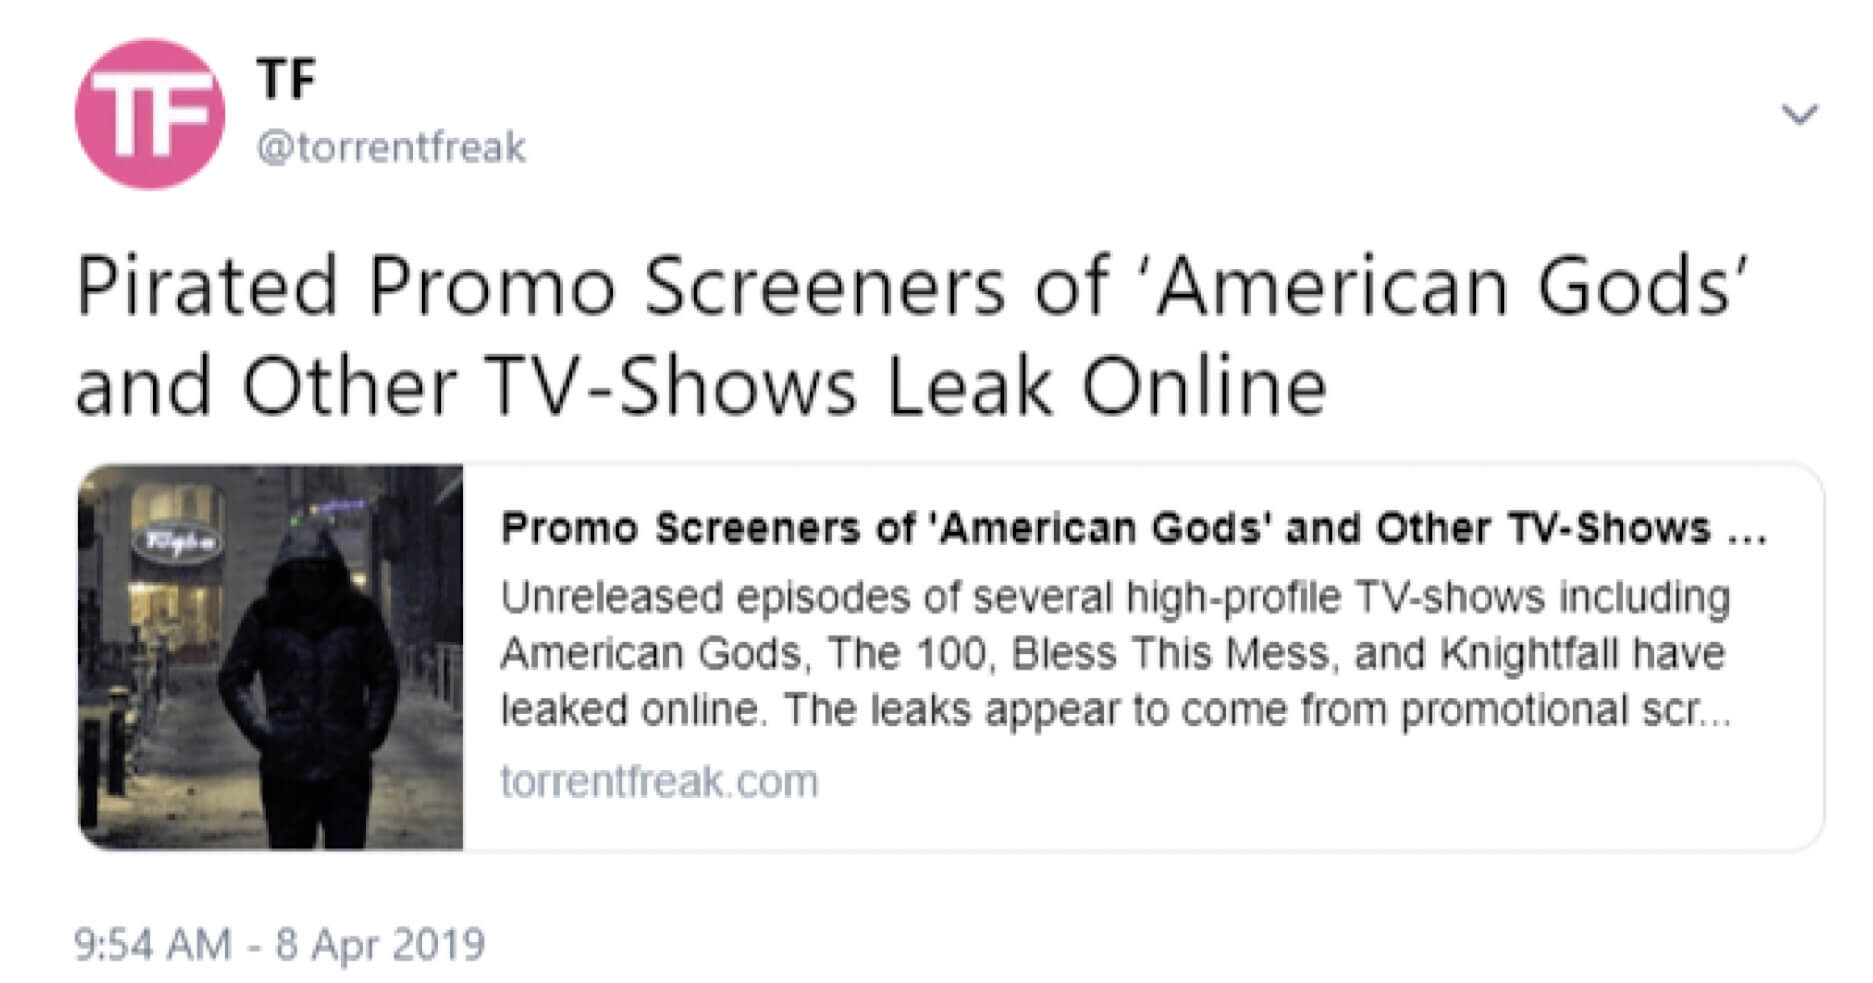 The tweet linking to a TorrentFreak that reported on some major leaks of unreleased TV shows before Starz filed its fake copyright claim.